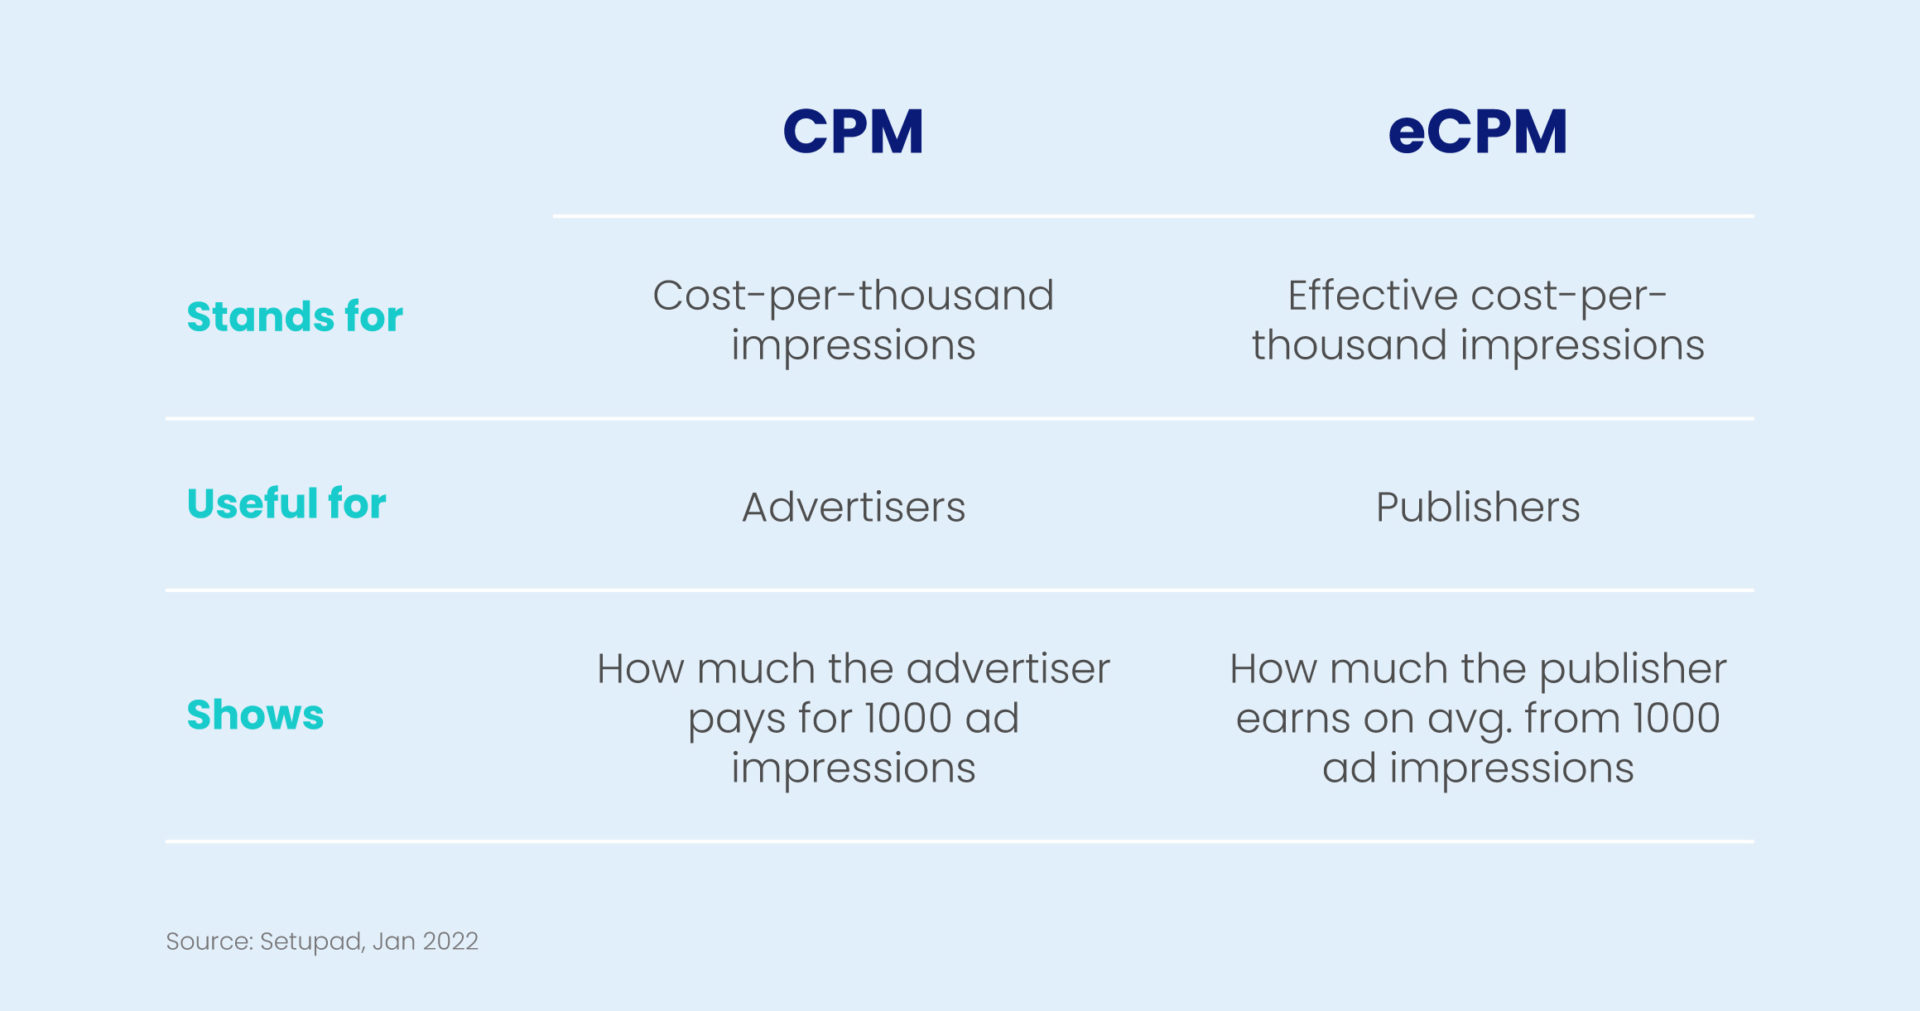 Chart showing differences between CPM vs eCPM for digital advertising. CPM stands for cost per 1,000 impressions; eCPM stands for effective cost per 1,000 impressions